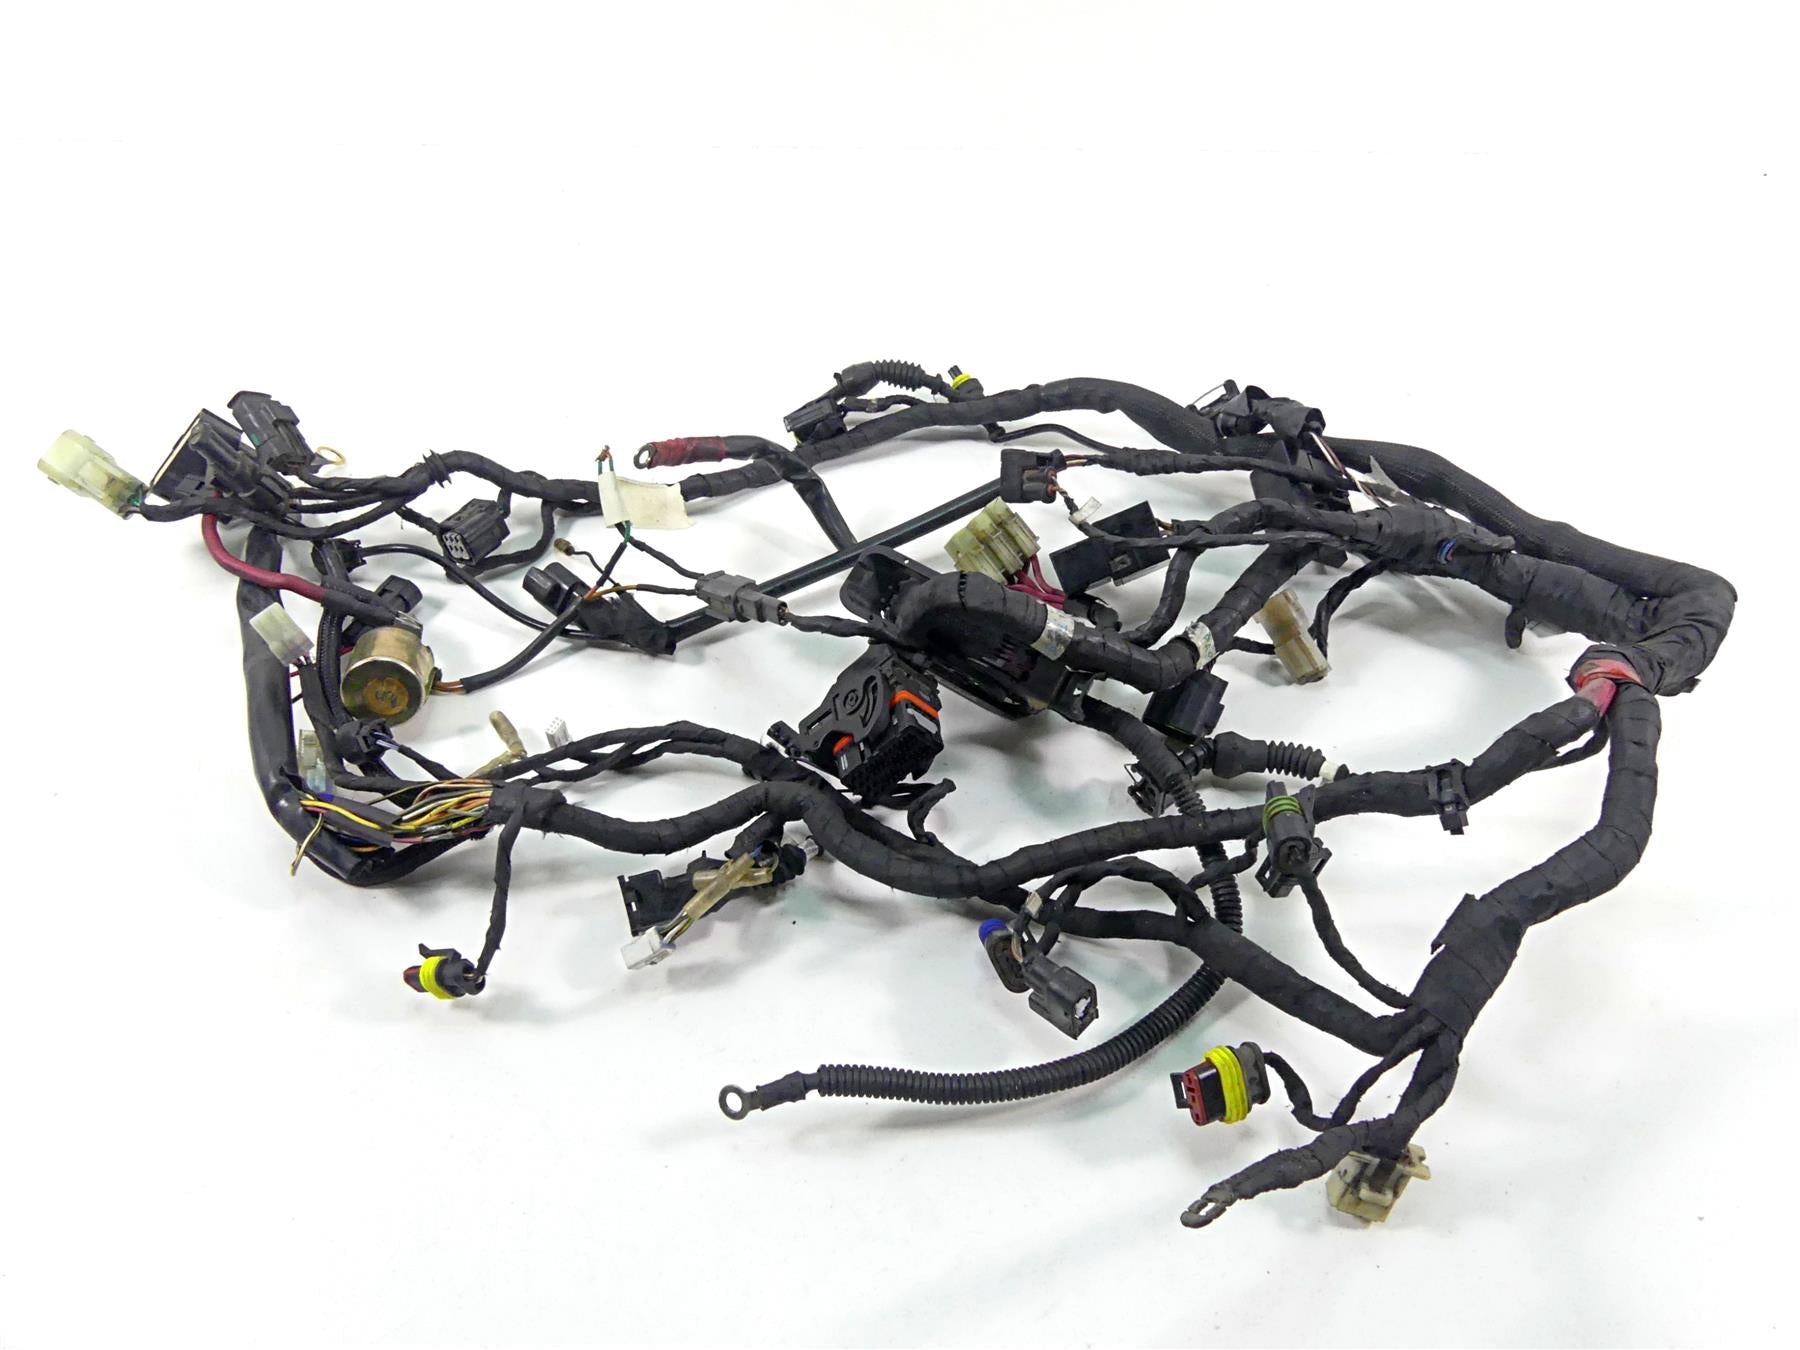 2012 Ducati Monster 1100 EVO Main Wiring Harness Loom -For Parts 51017561A | Mototech271